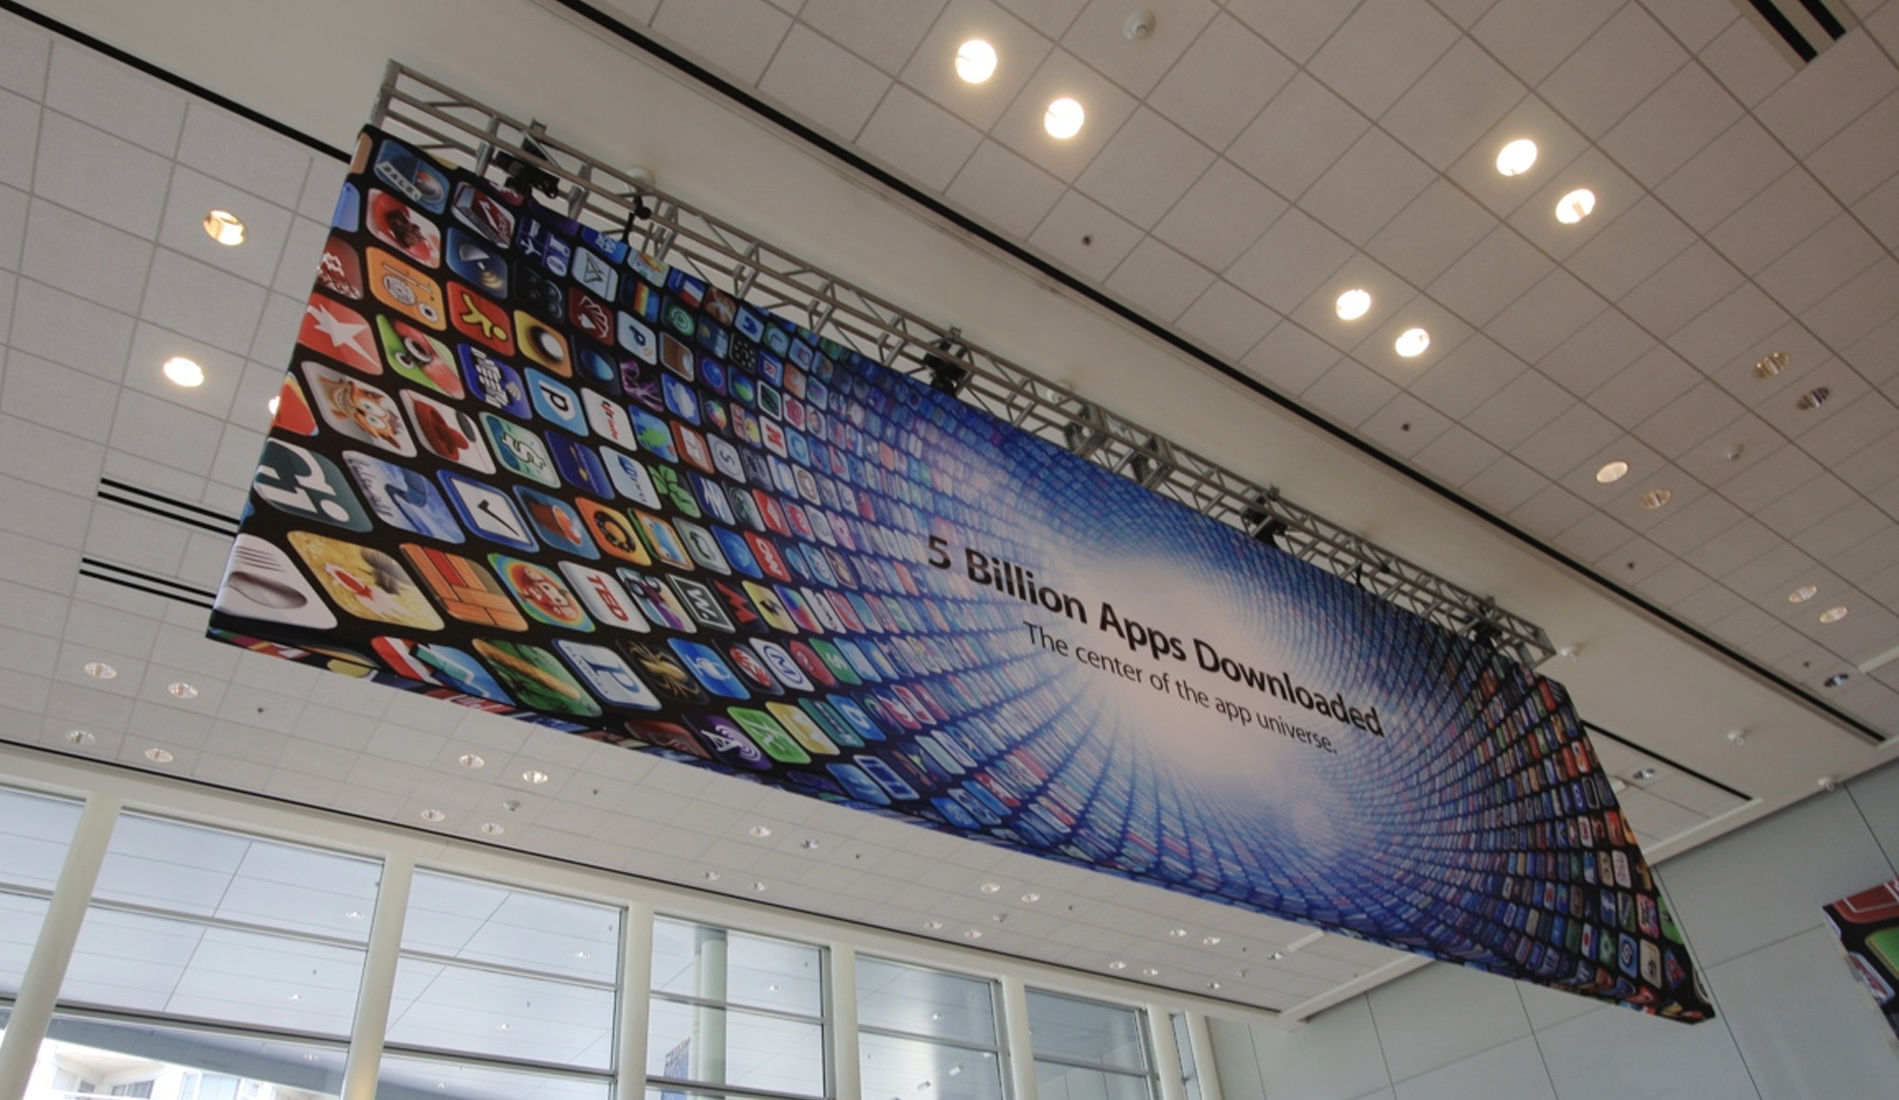 Fusion attends Apple's WWDC10